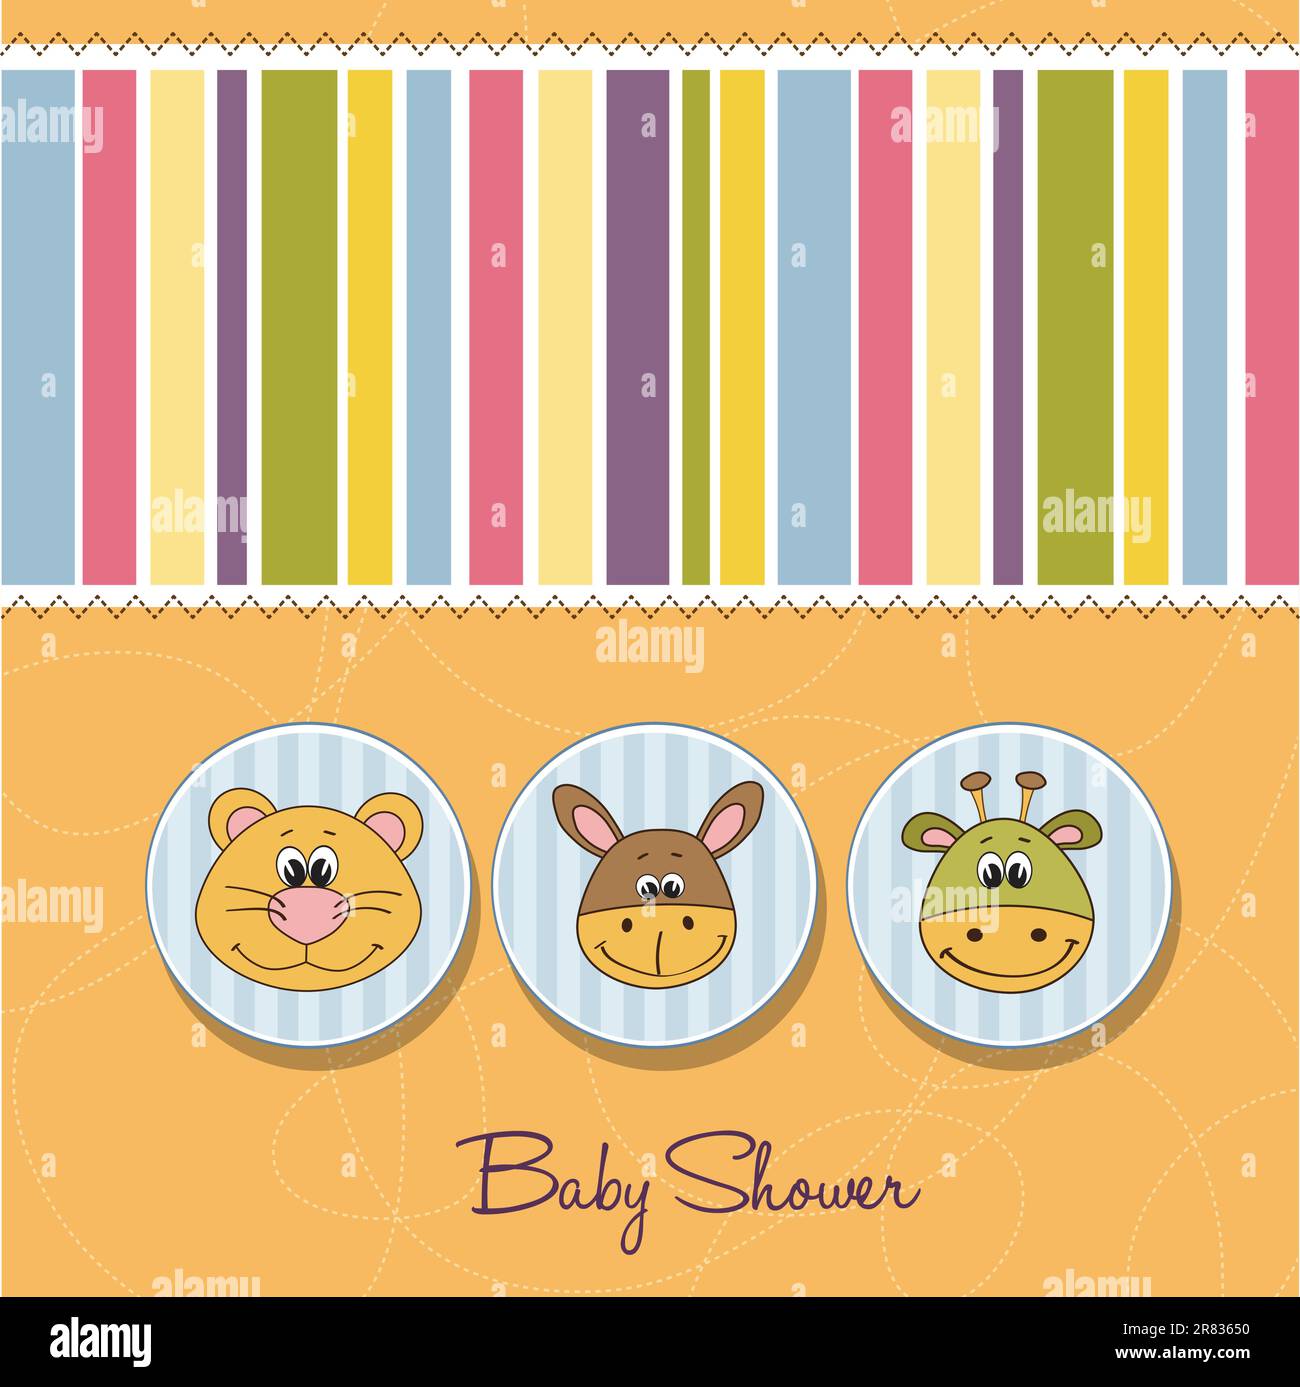 baby shower card Stock Vector